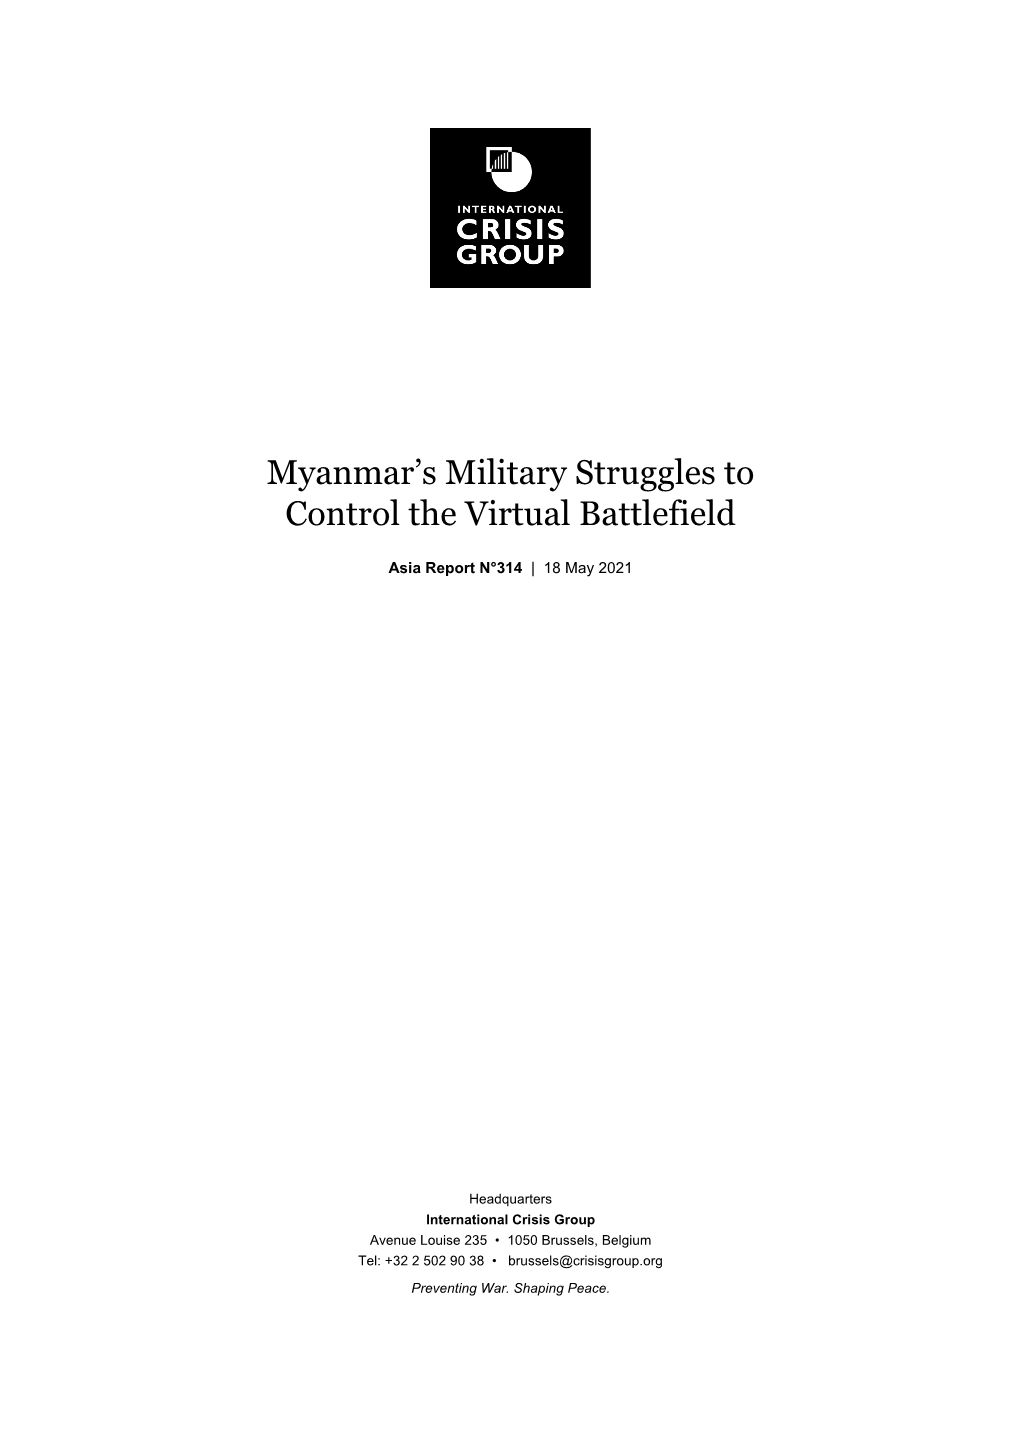 Myanmar's Military Struggles to Control the Virtual Battlefield